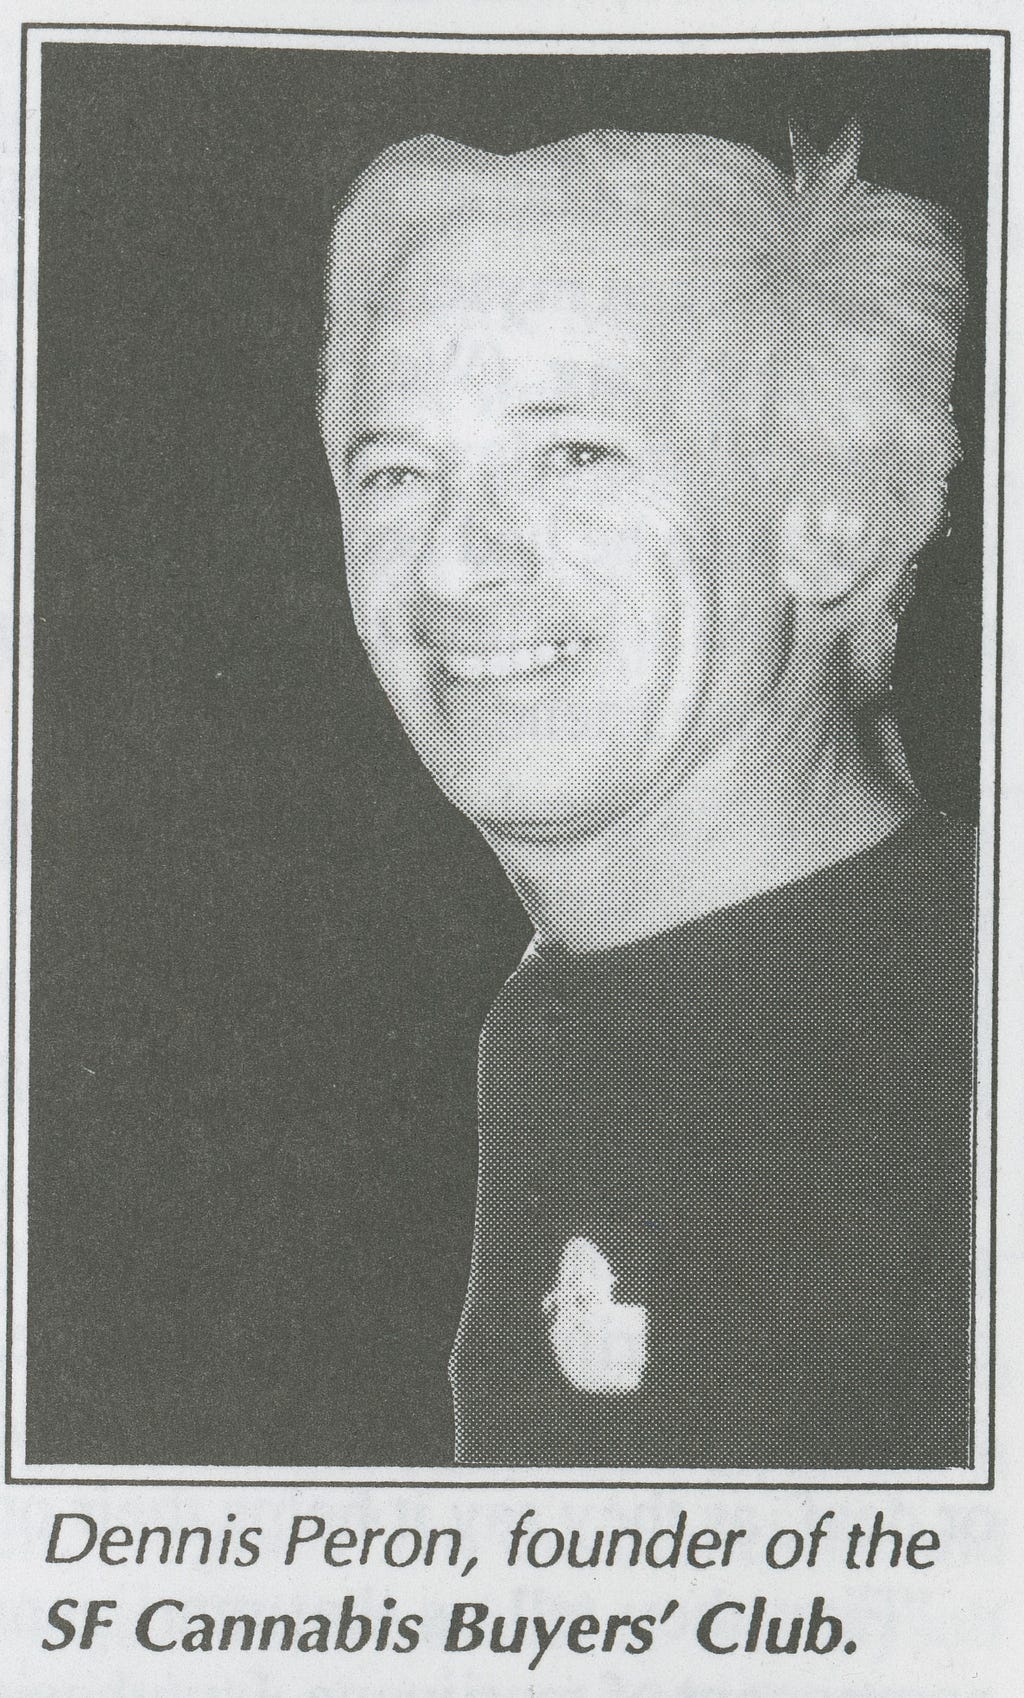 A newspaper clipping of a black and white photo of Dennis Peron. Below it are the words ‘Dennis Peron, founder of the SF Cannabis Buyers’ Club’.